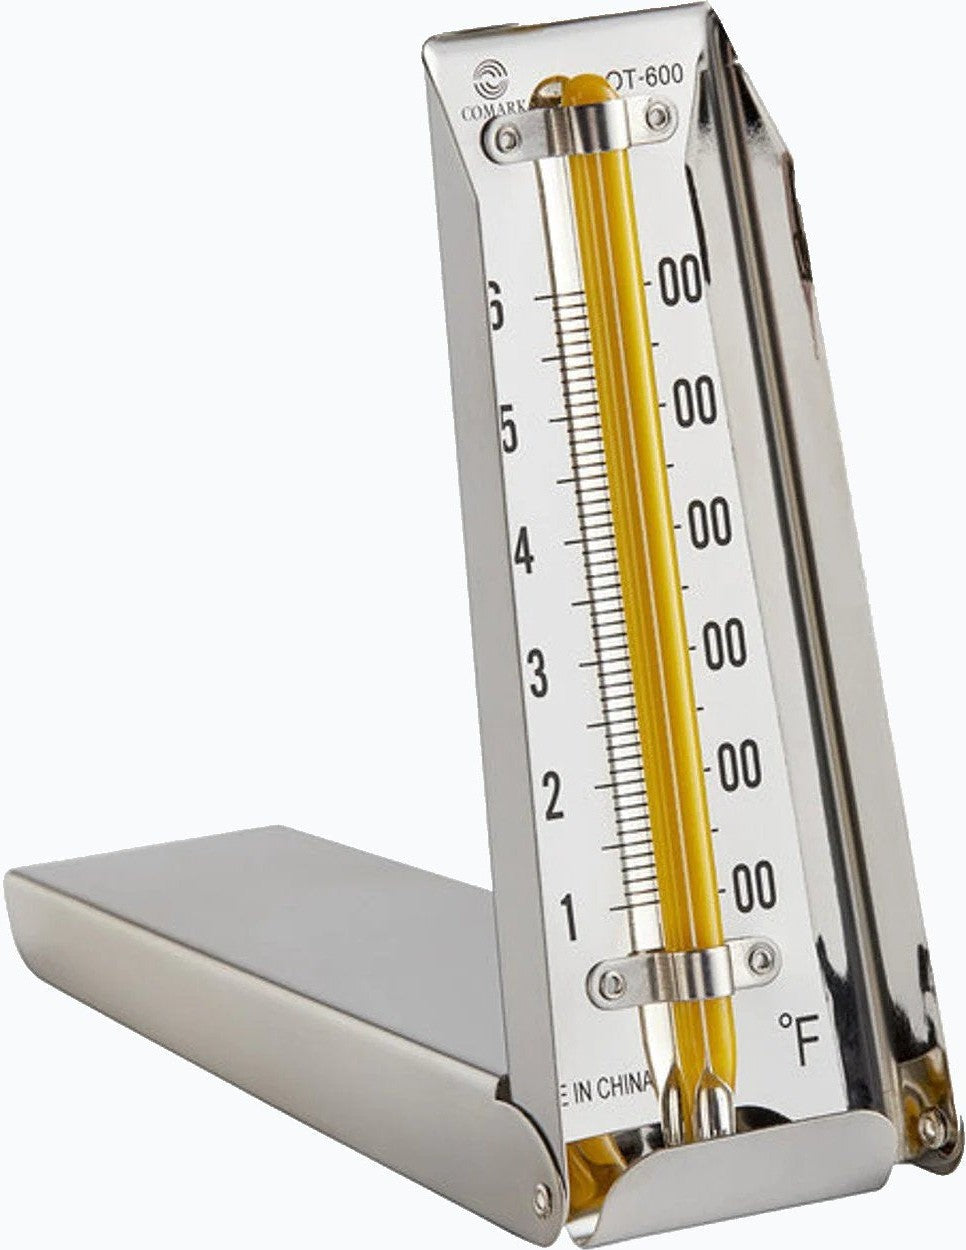 Comark Oven Thermometers